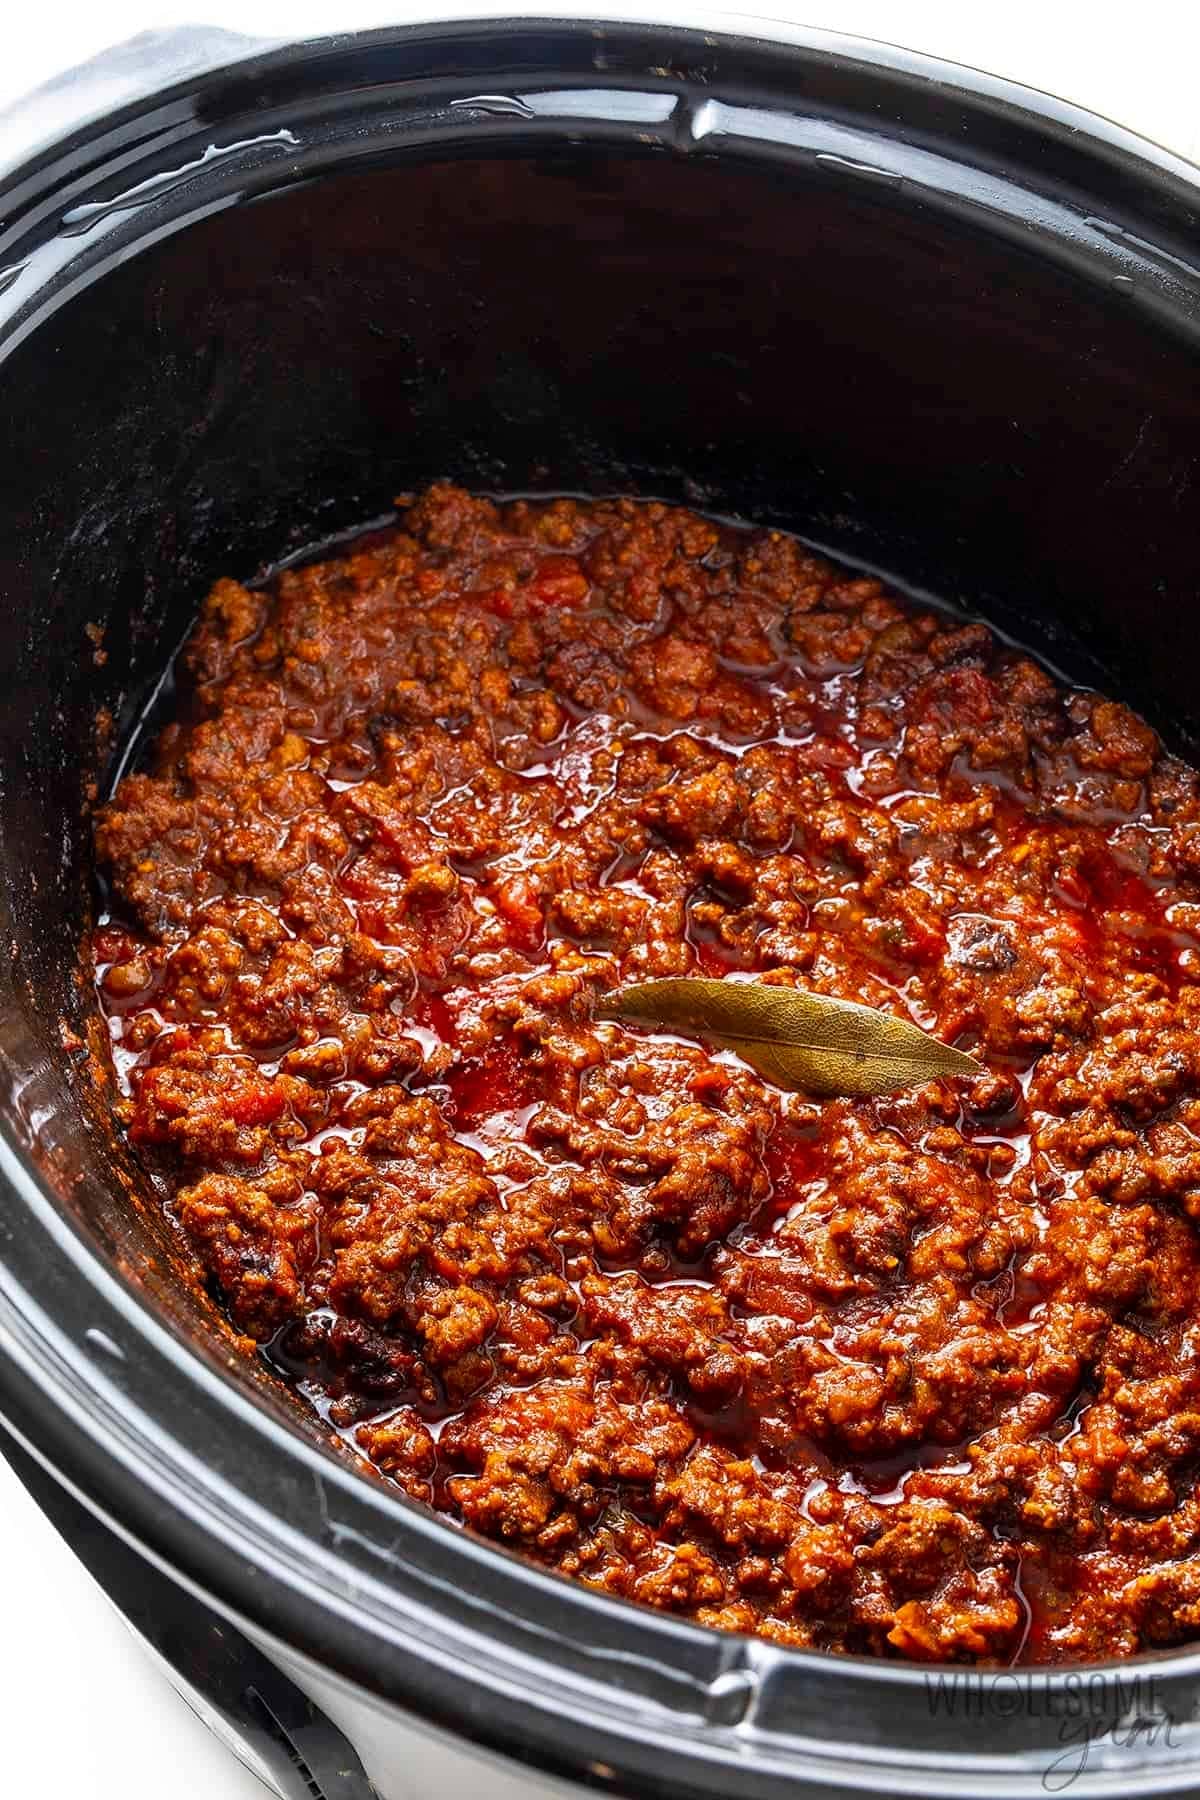 Chili cooked in a slow cooker.  